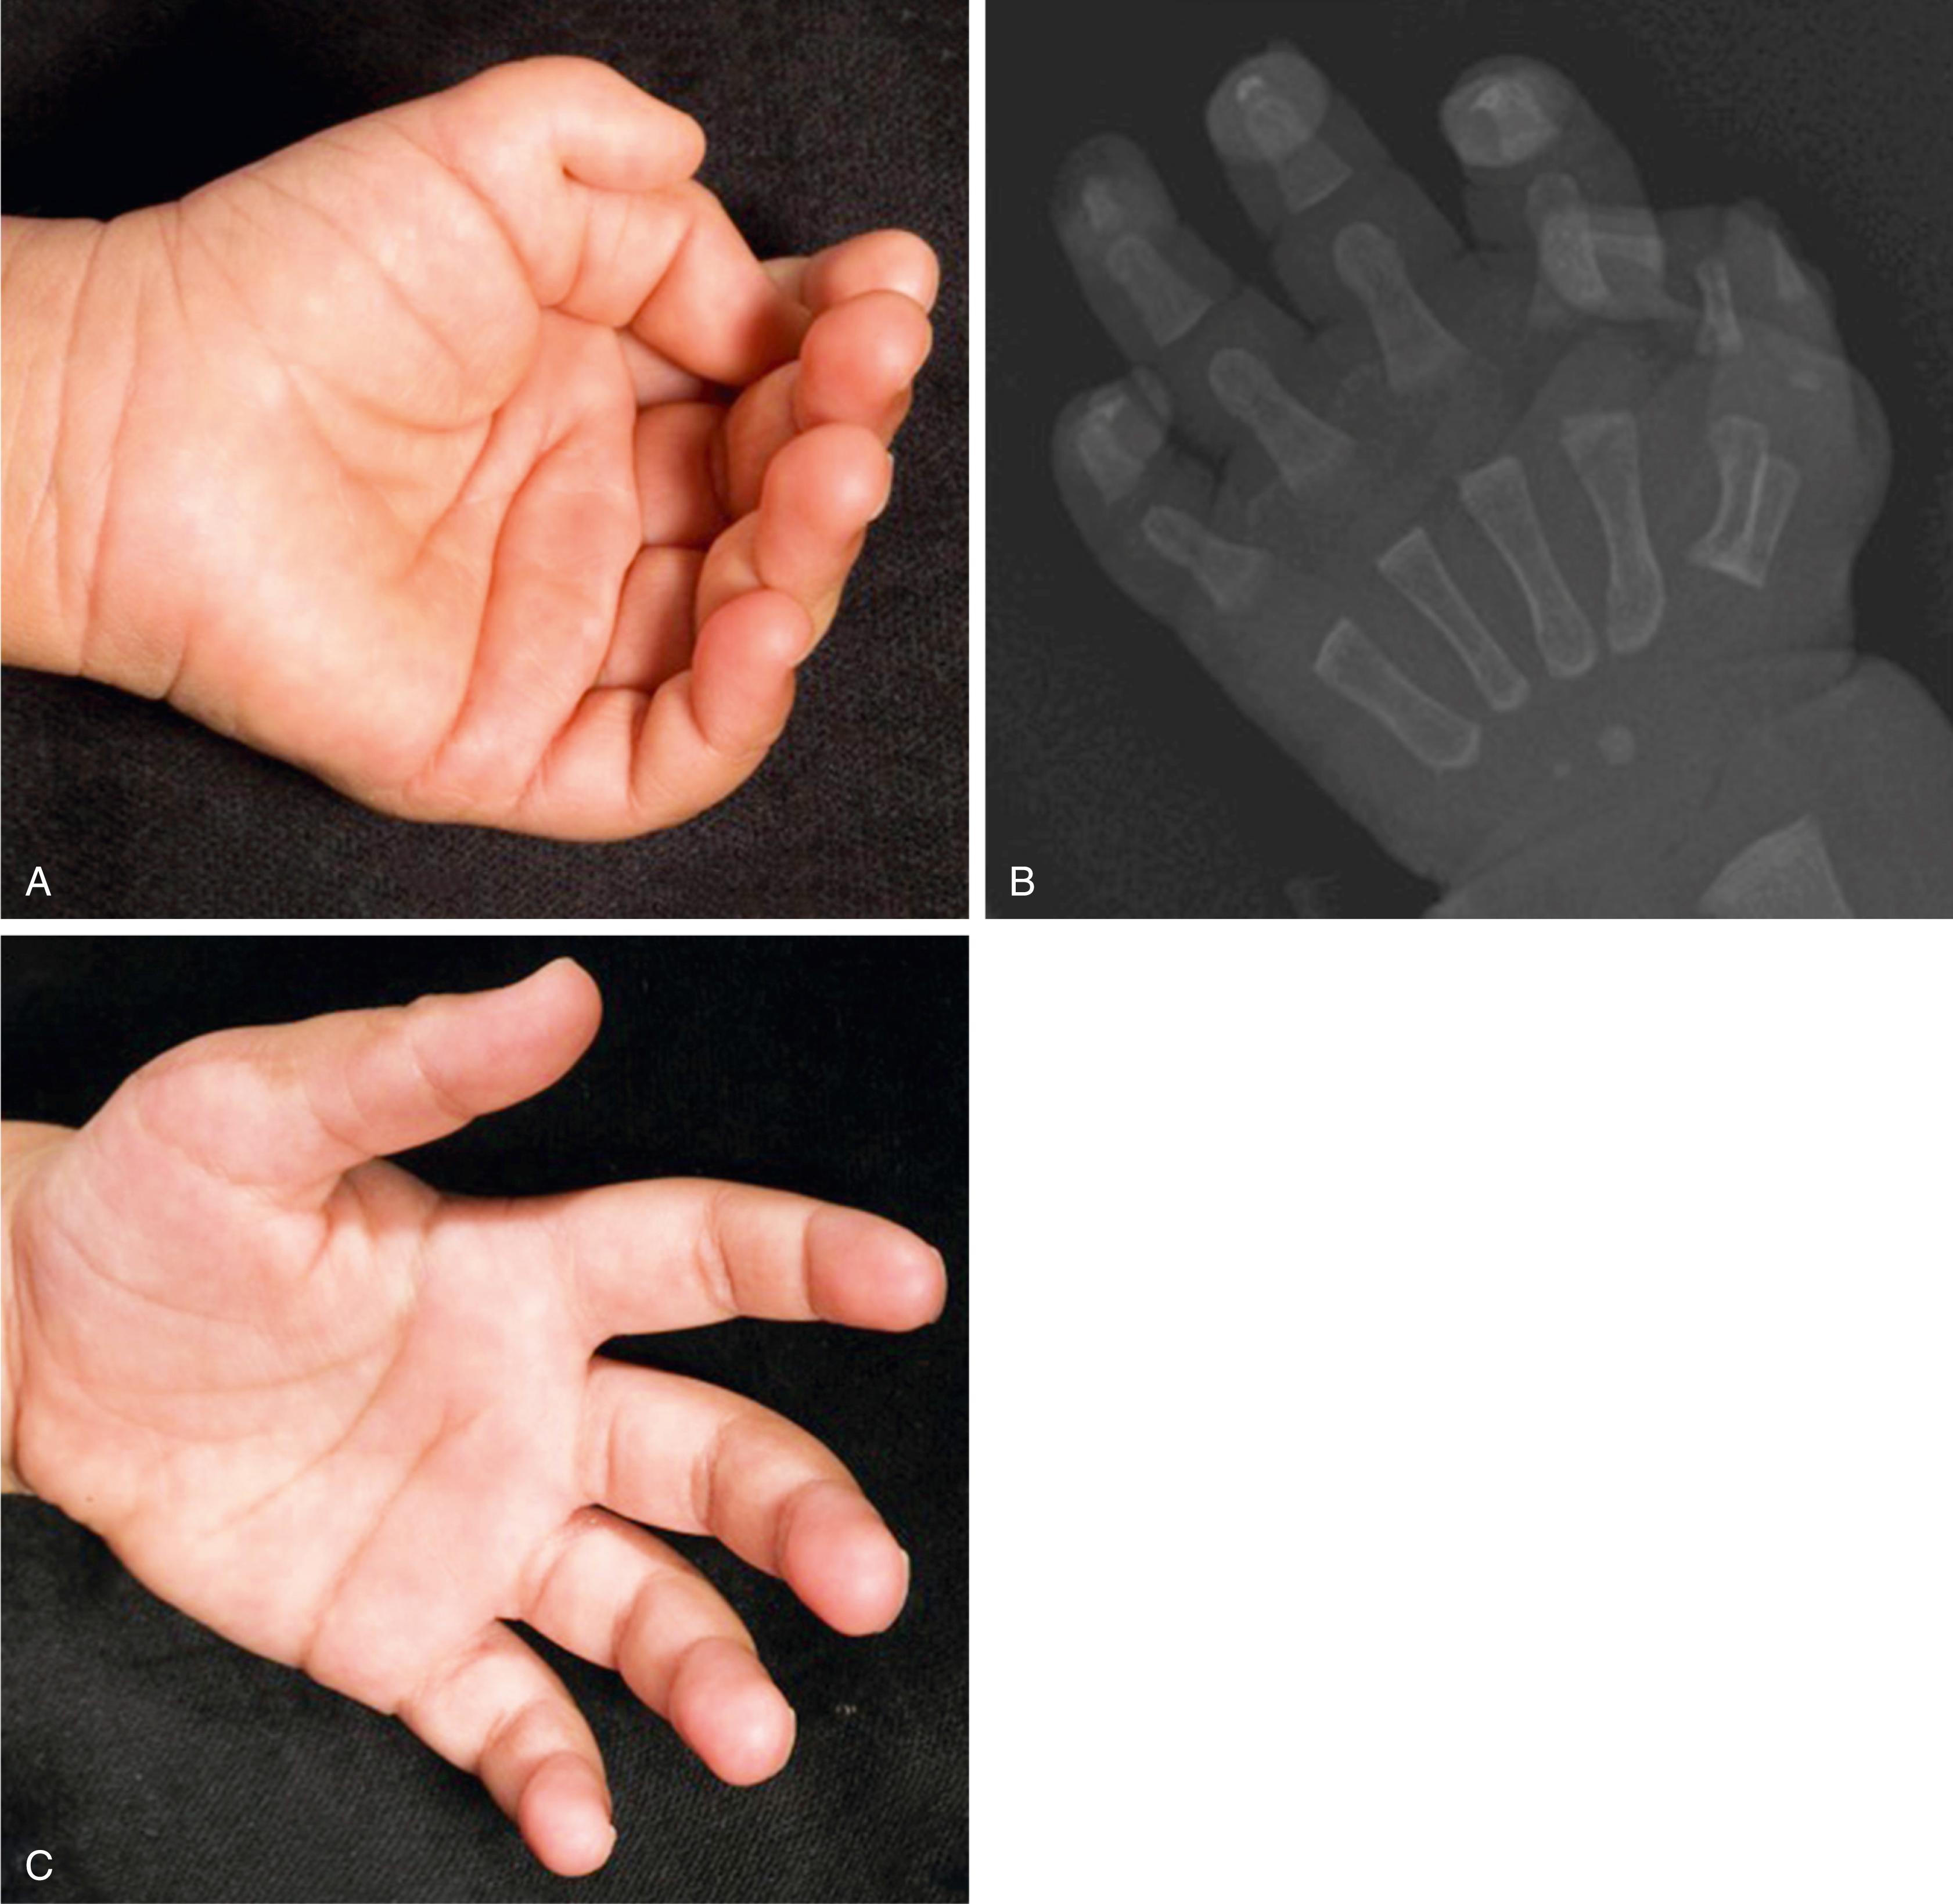 Fig. 45.11, Reconstruction of a Wassel type VII duplication. (A) Preoperative image of an unbalanced type VII duplication. (B) Preoperative radiograph demonstrating smaller triphalangeal radial duplicate. (C) Postoperative image of corrected type VII duplication after removal of radial duplicate.